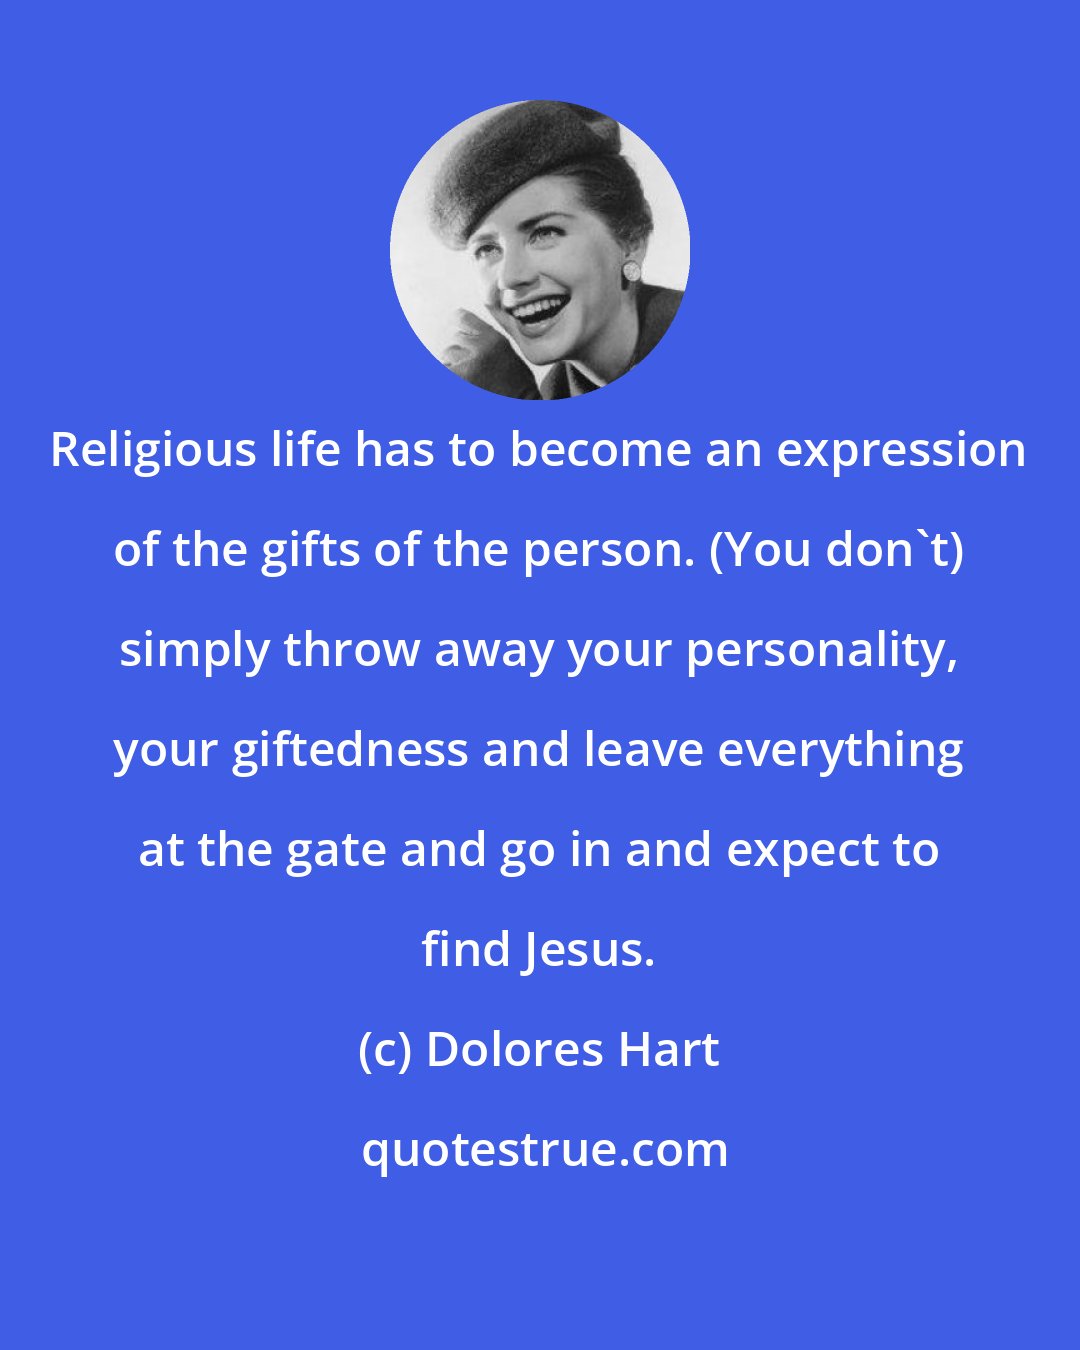 Dolores Hart: Religious life has to become an expression of the gifts of the person. (You don't) simply throw away your personality, your giftedness and leave everything at the gate and go in and expect to find Jesus.